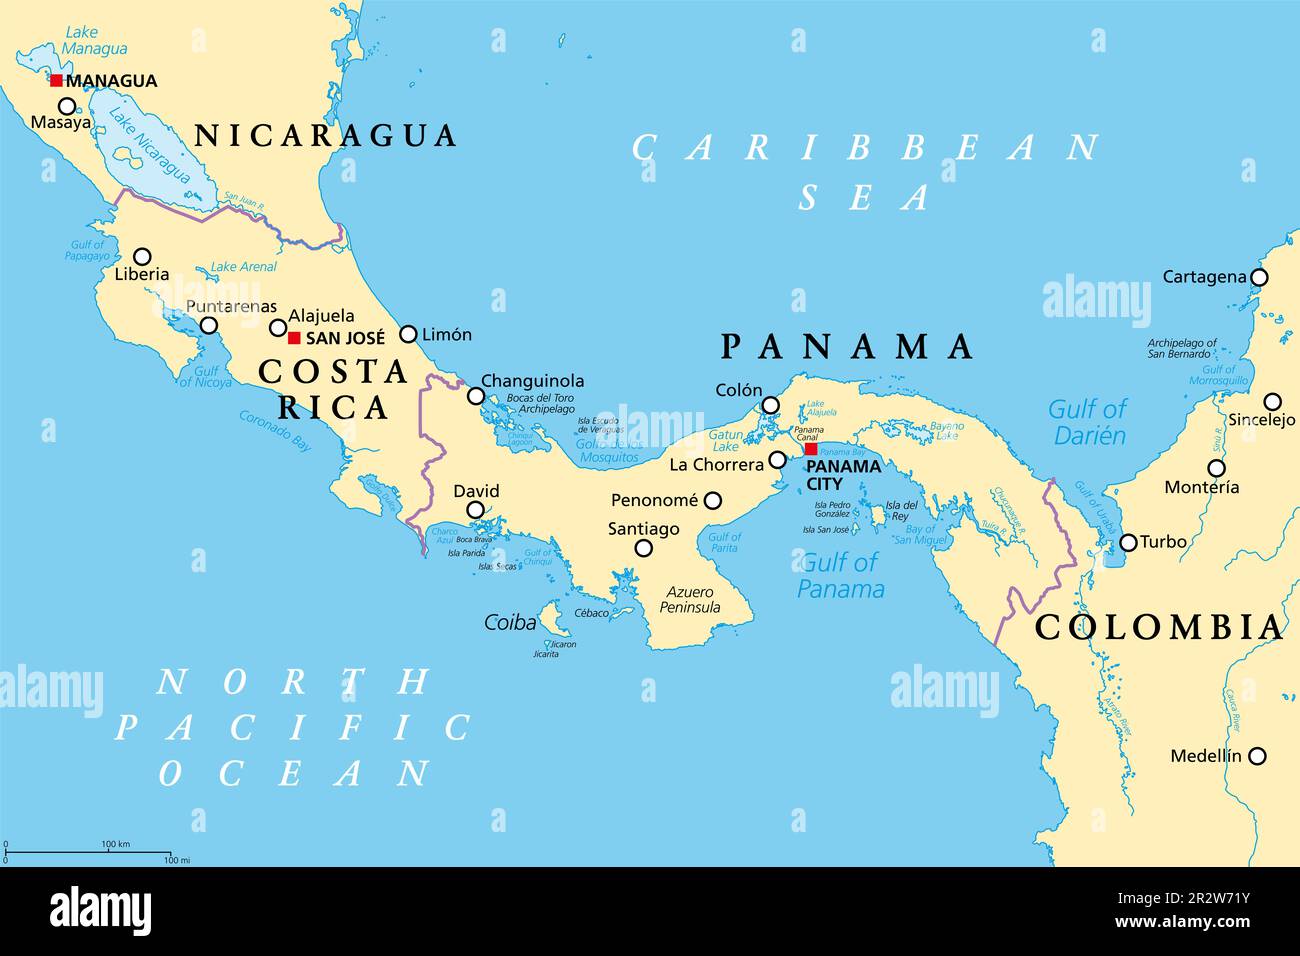 Costa Rica and Panama, political map, with Isthmus of Panama and Darien Gap. Narrow strip of land and region between Caribbean Sea and Pacific Ocean. Stock Photo